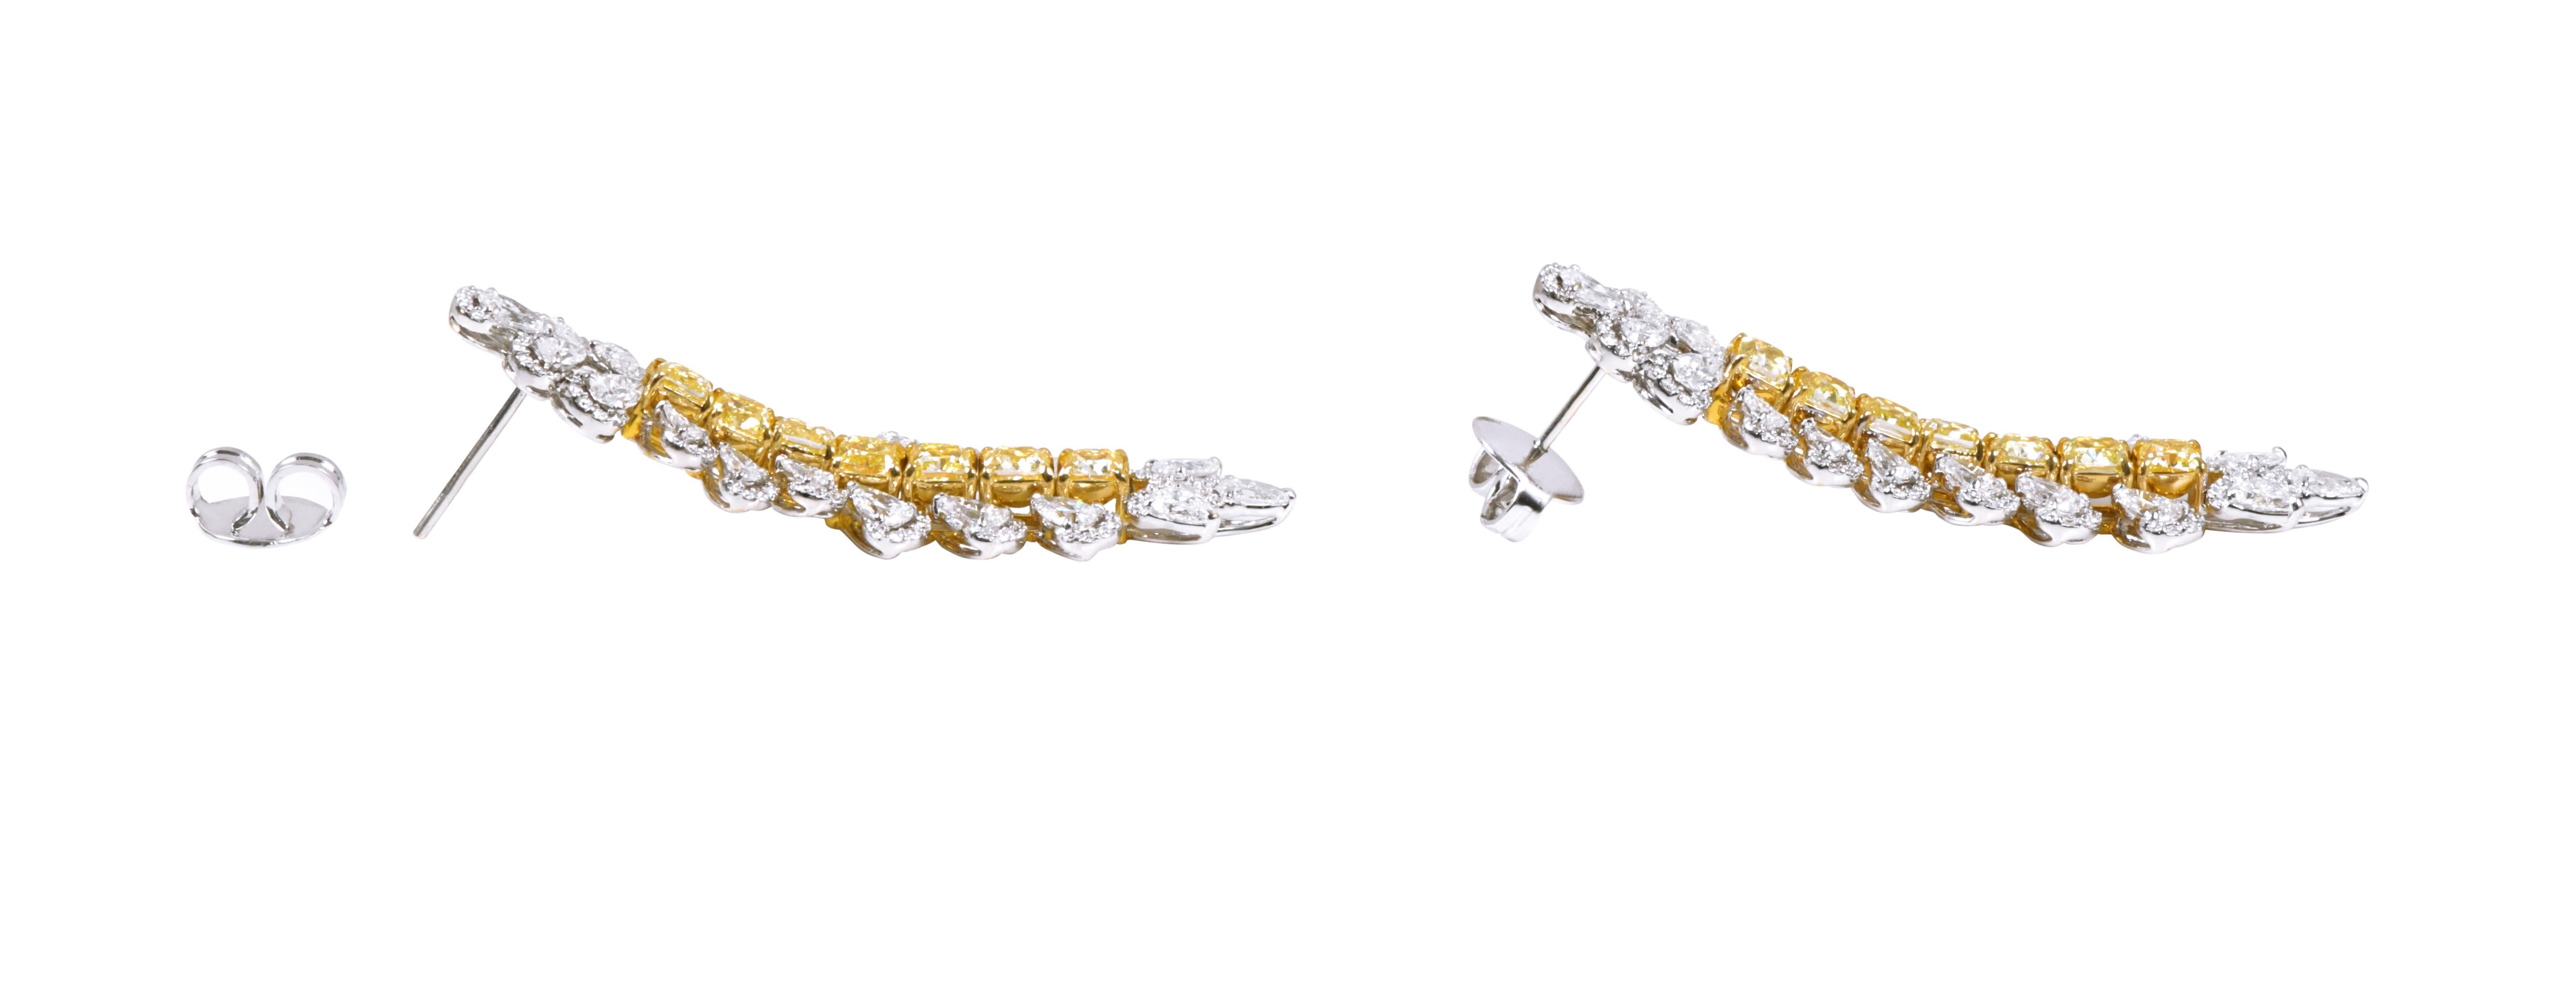 18 Karat Gold 13.31 Carat Yellow and White Diamond Solitaires Cocktail Earrings For Sale 1